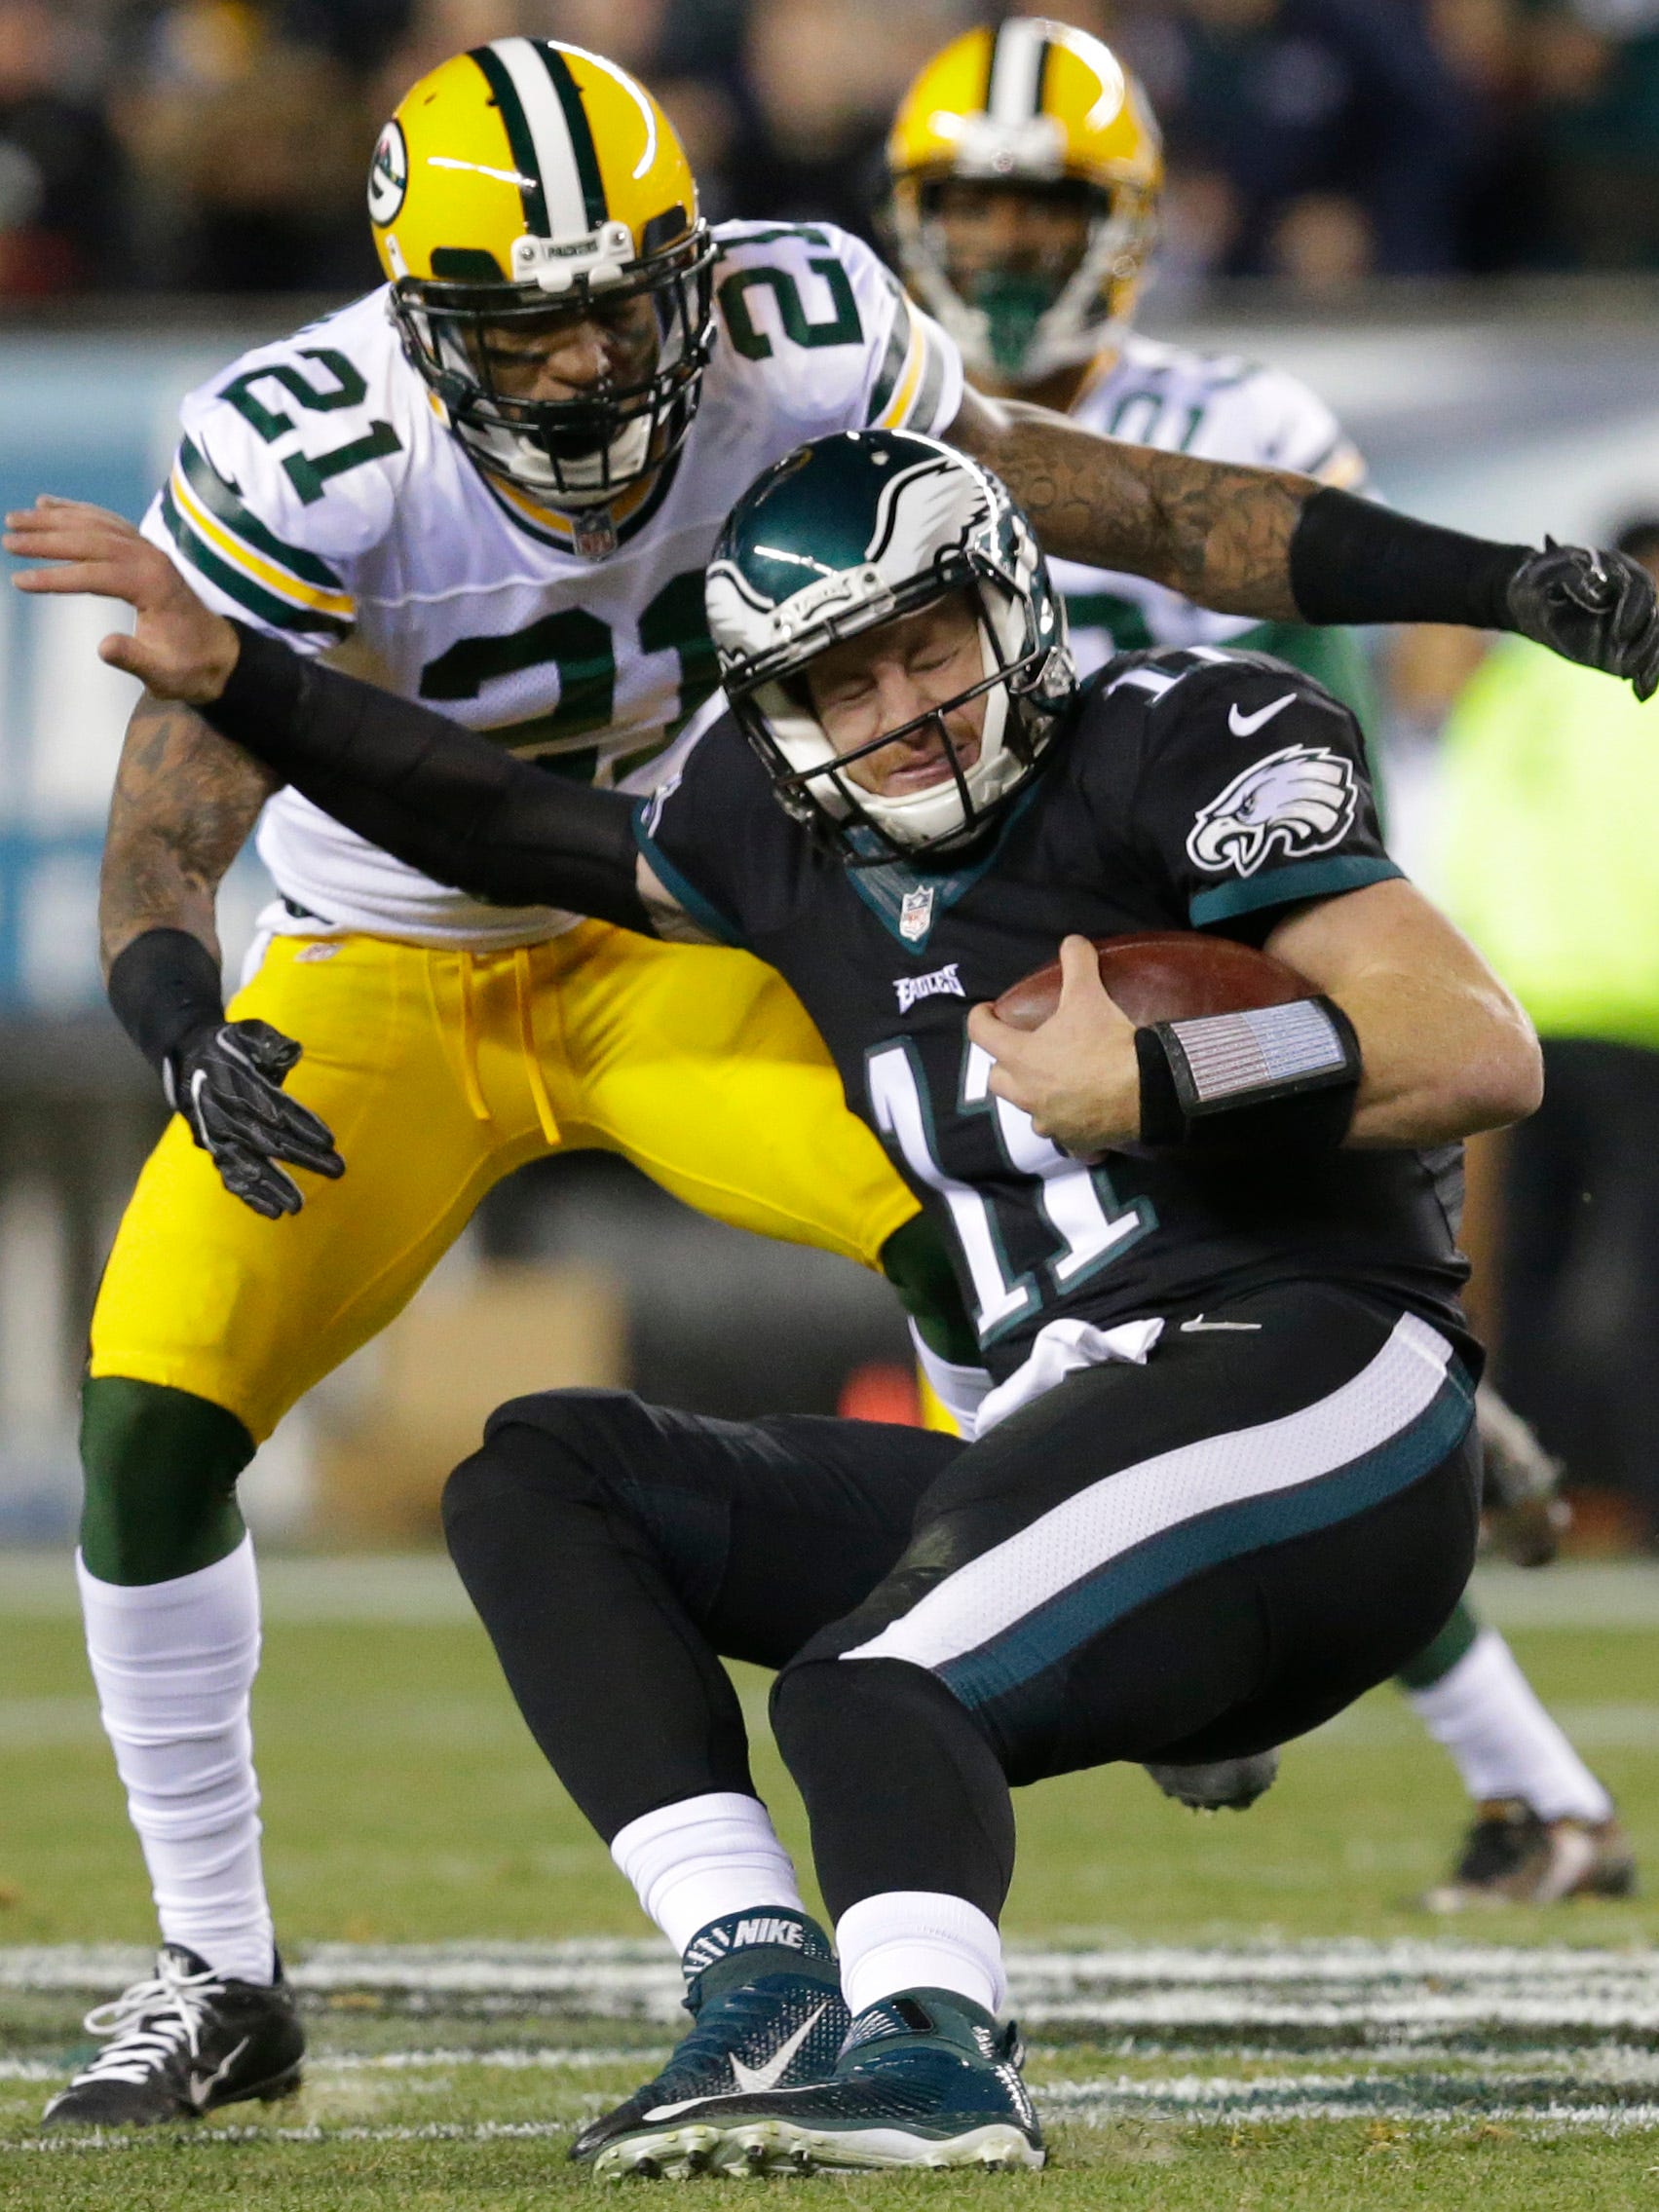 Green Bay Packers free safety Ha Ha Clinton-Dix (21) stops Philadelphia Eagles quarterback Carson Wentz (11) short of a first down during the second quarter of their game Monday, November 28, 2016 at Lincoln Financial Field in Philadelphia, Penn.